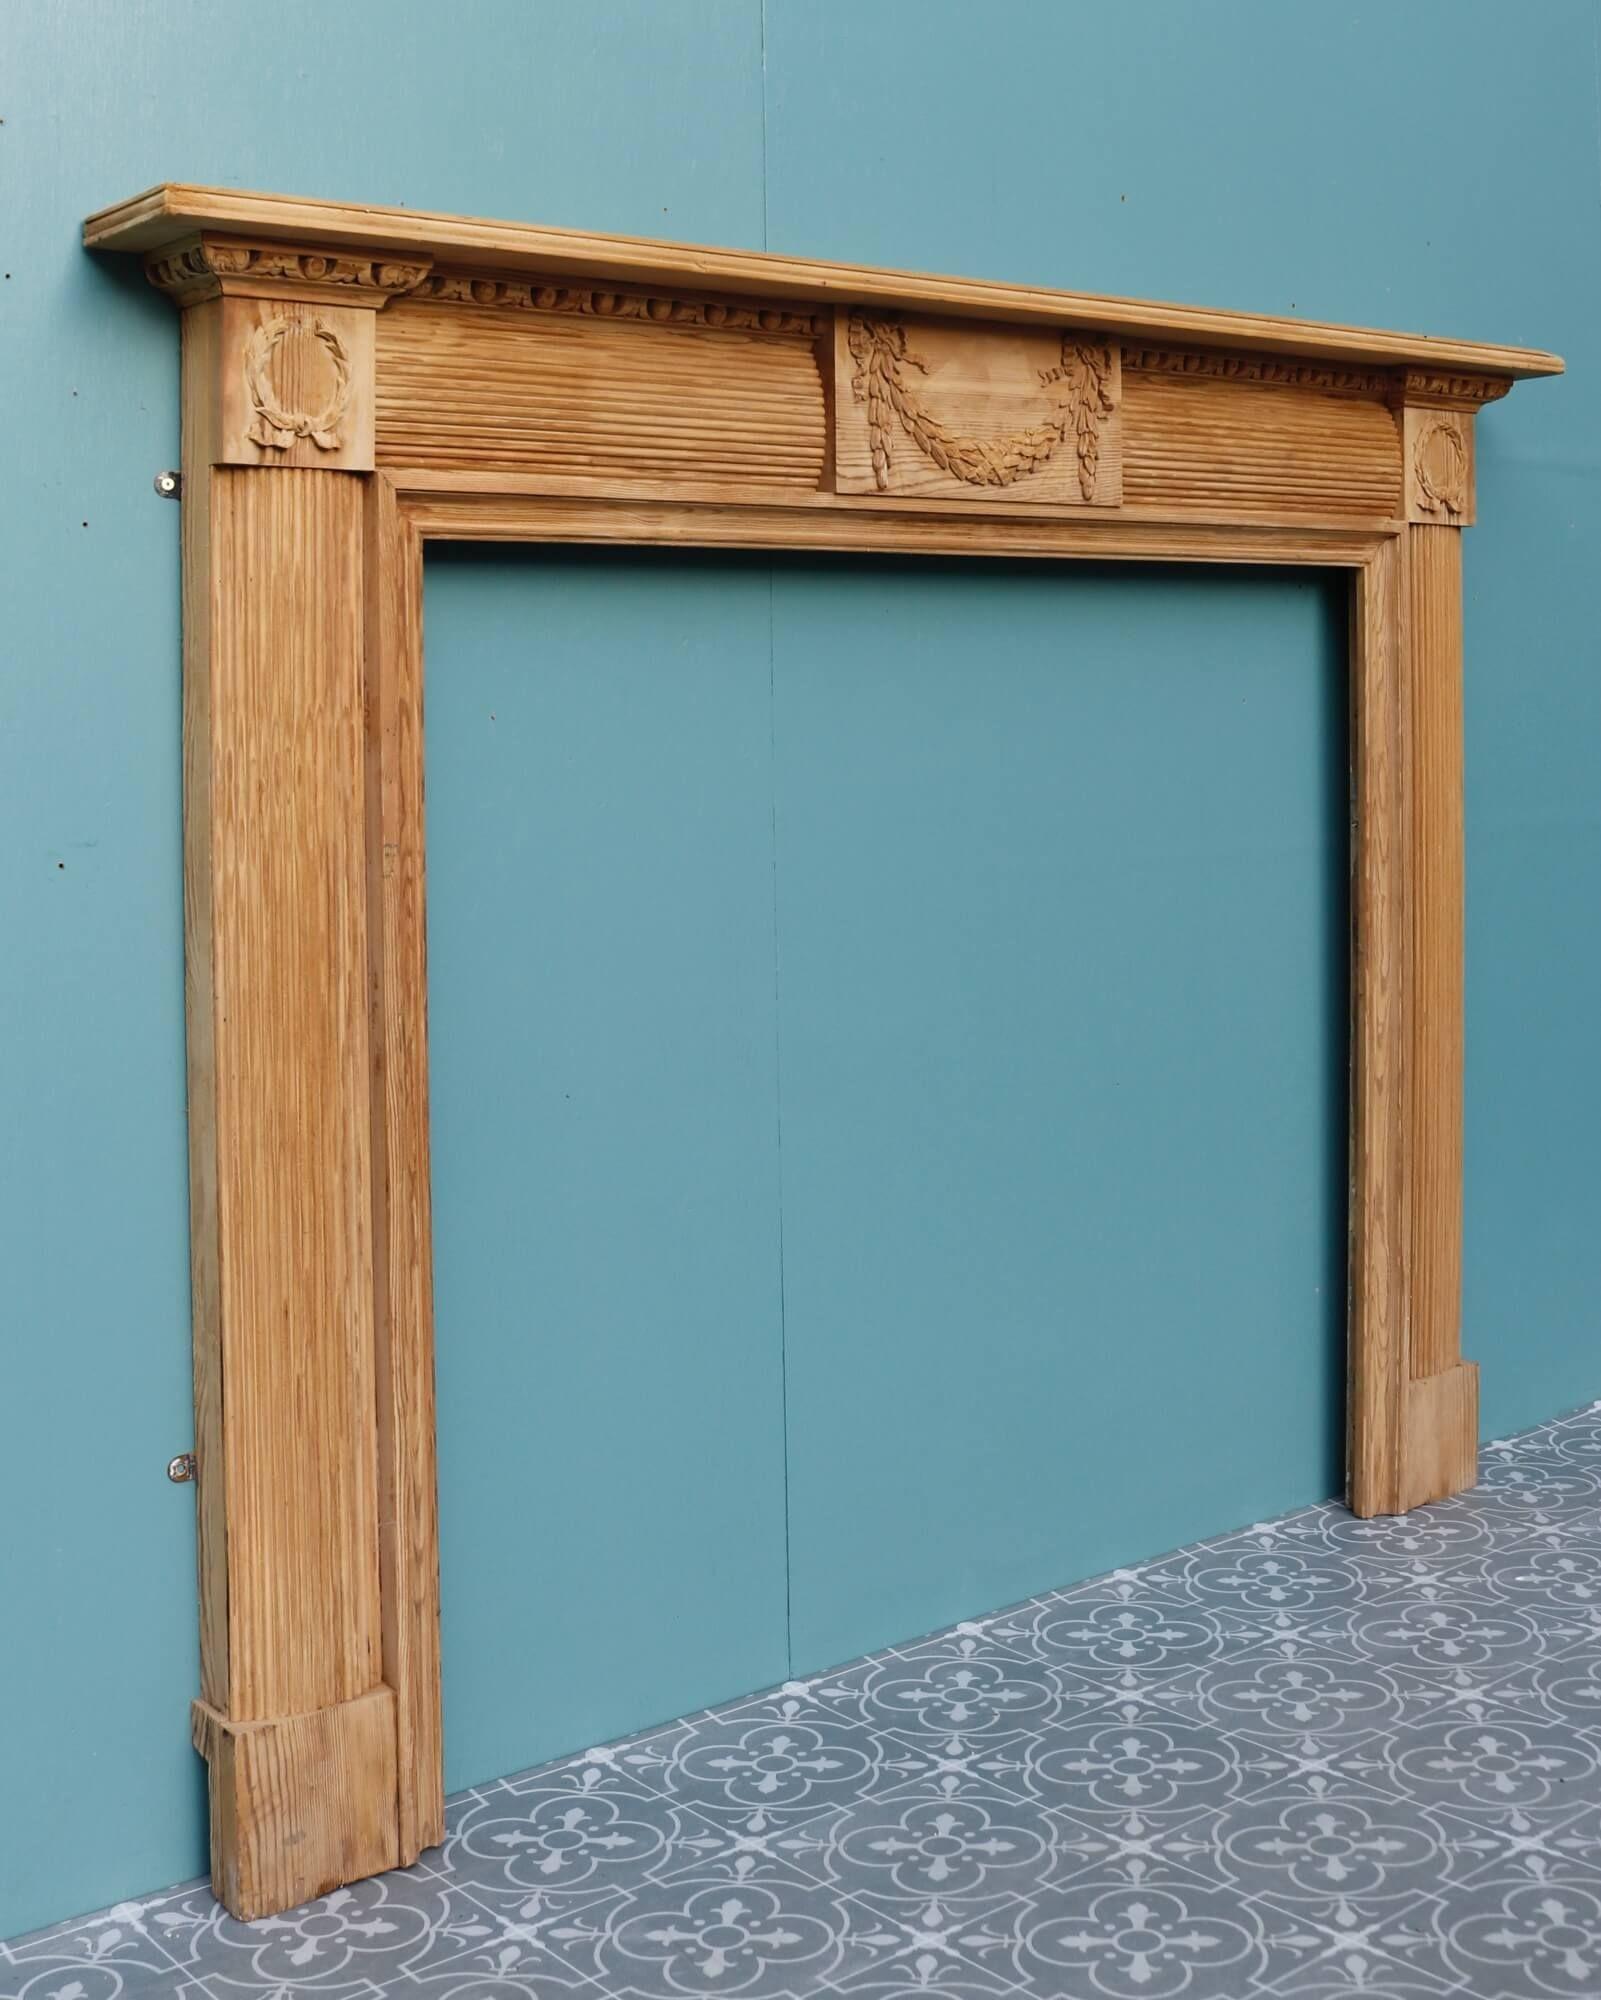 Regency Style Wooden Fire Mantel In Good Condition For Sale In Wormelow, Herefordshire